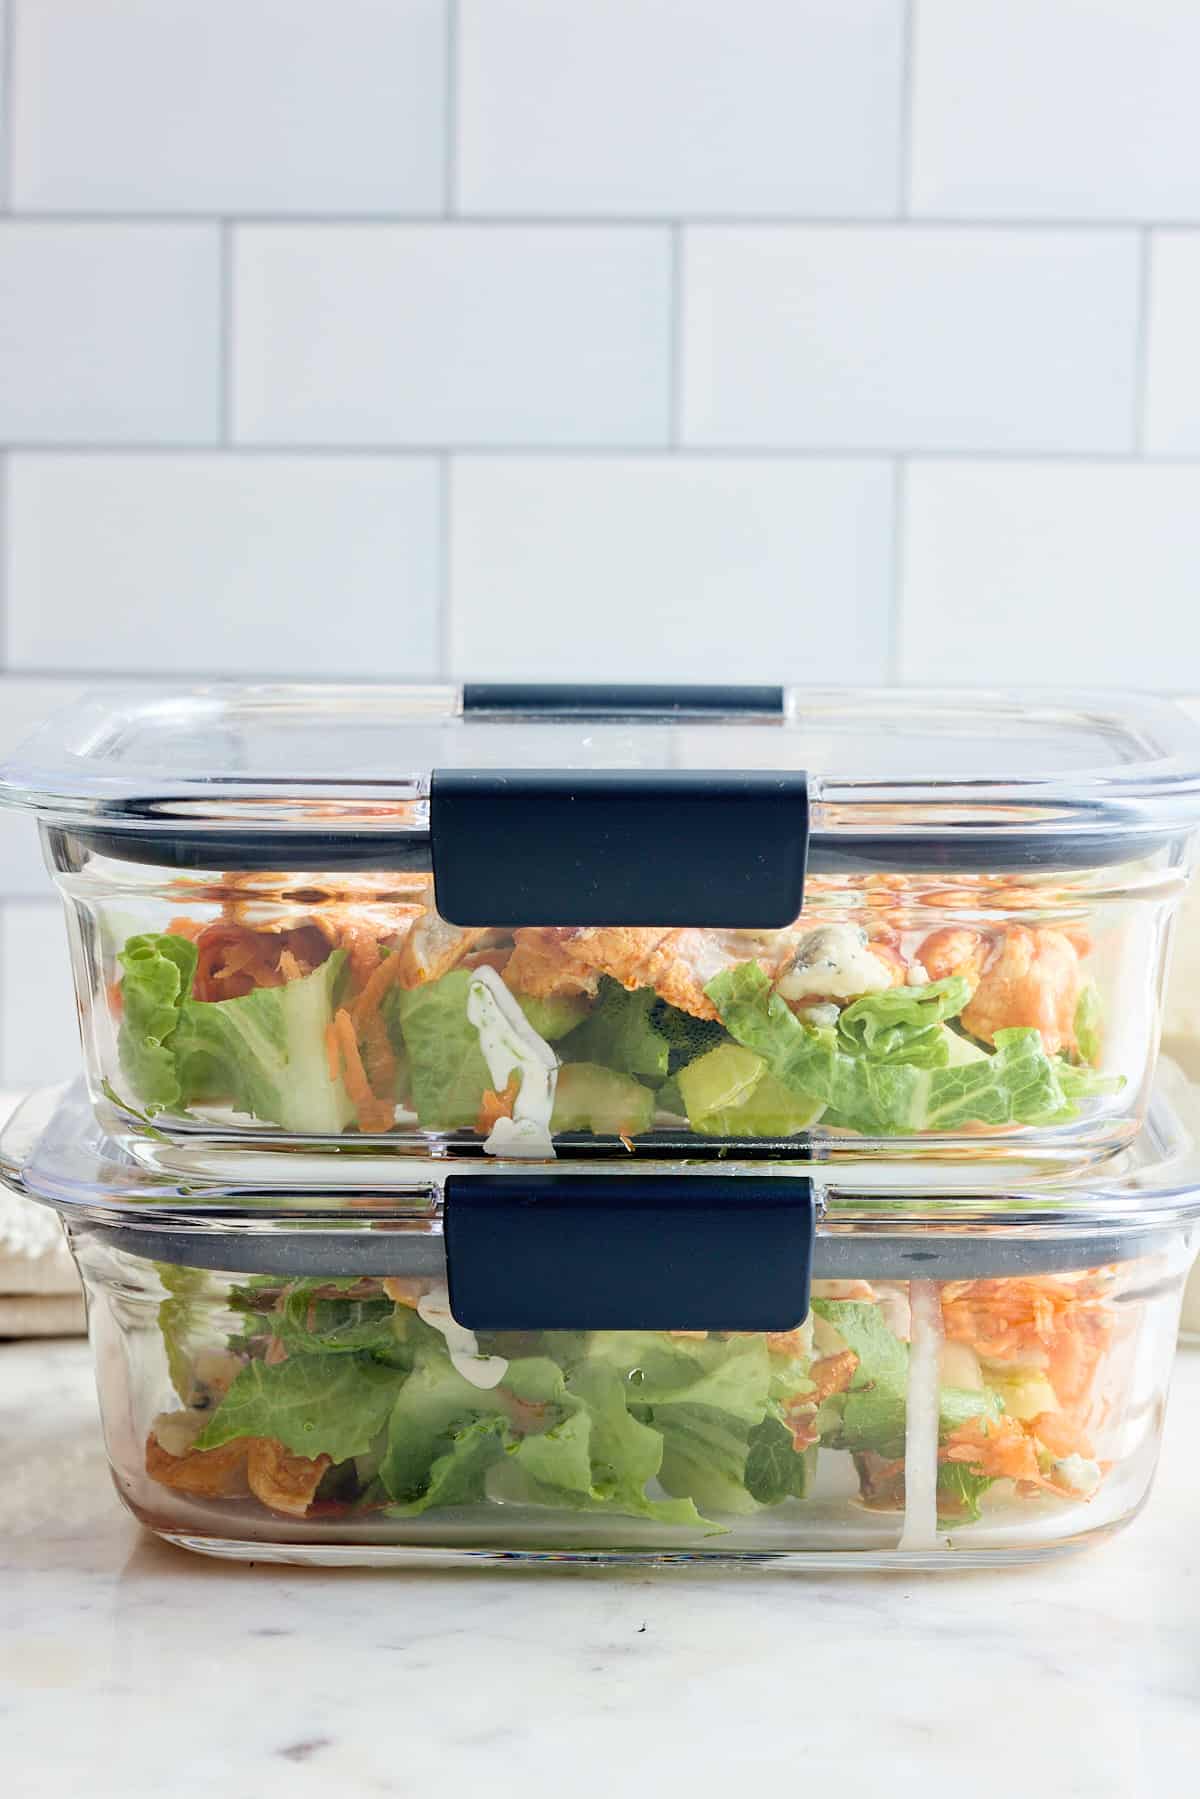 buffalo chicken salads packed for lunch in containers